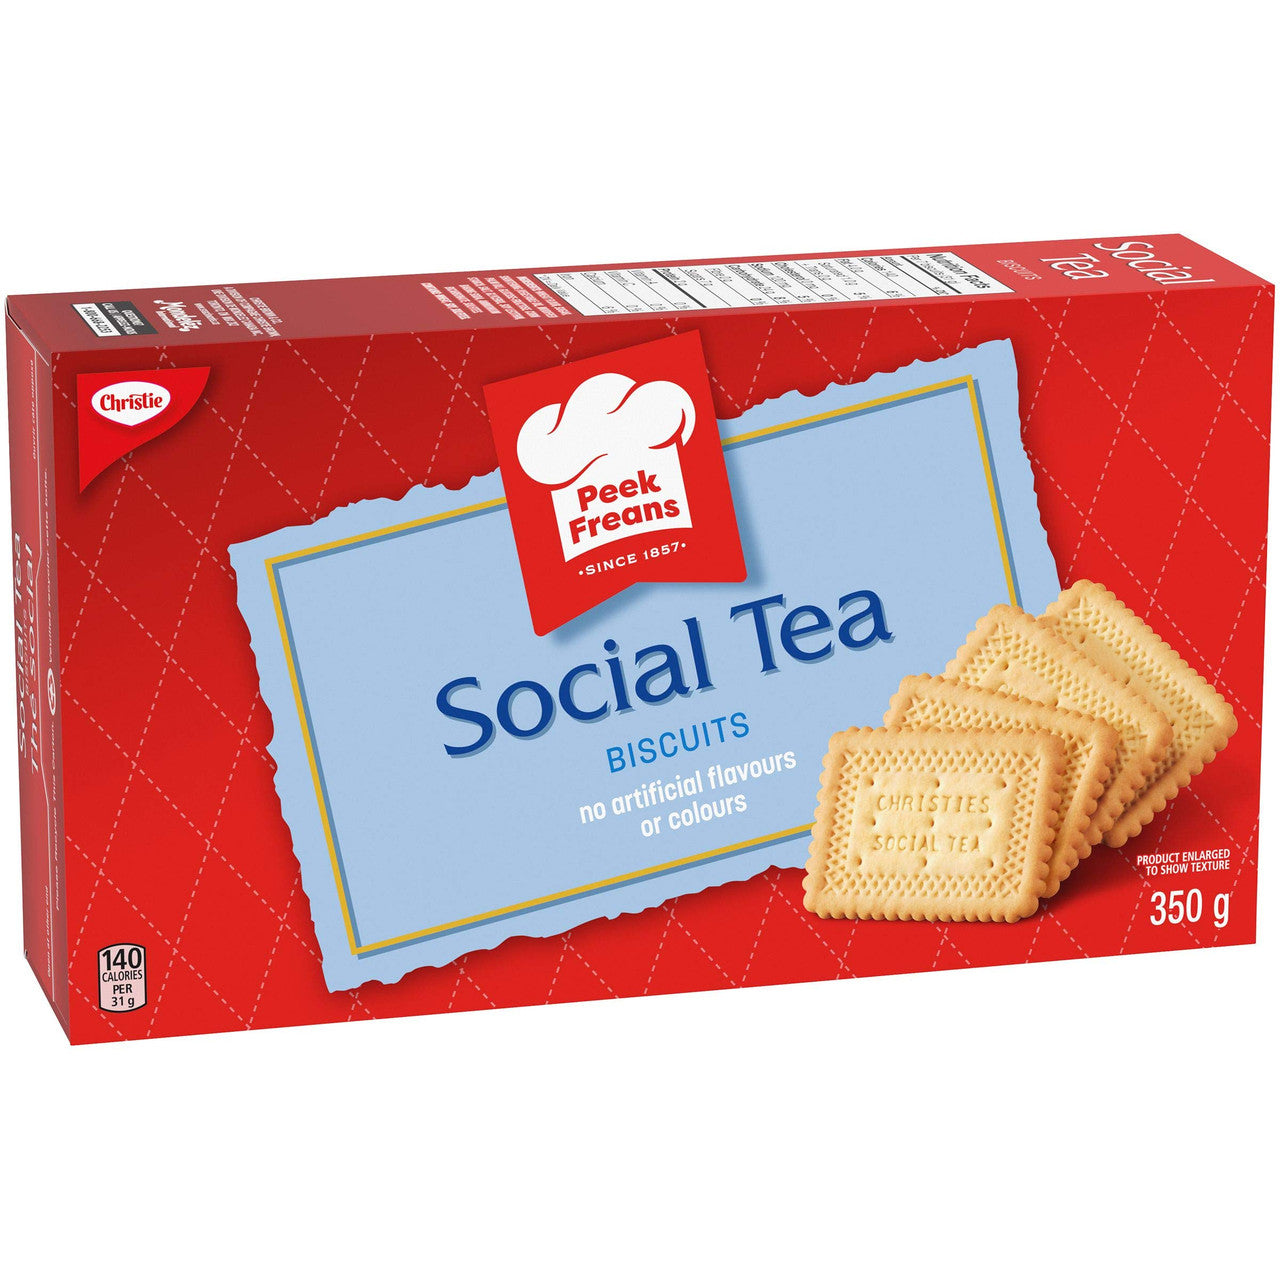 Christie Peek Freans Social Tea Cookies, 350g/12.3 oz {Imported from Canada}